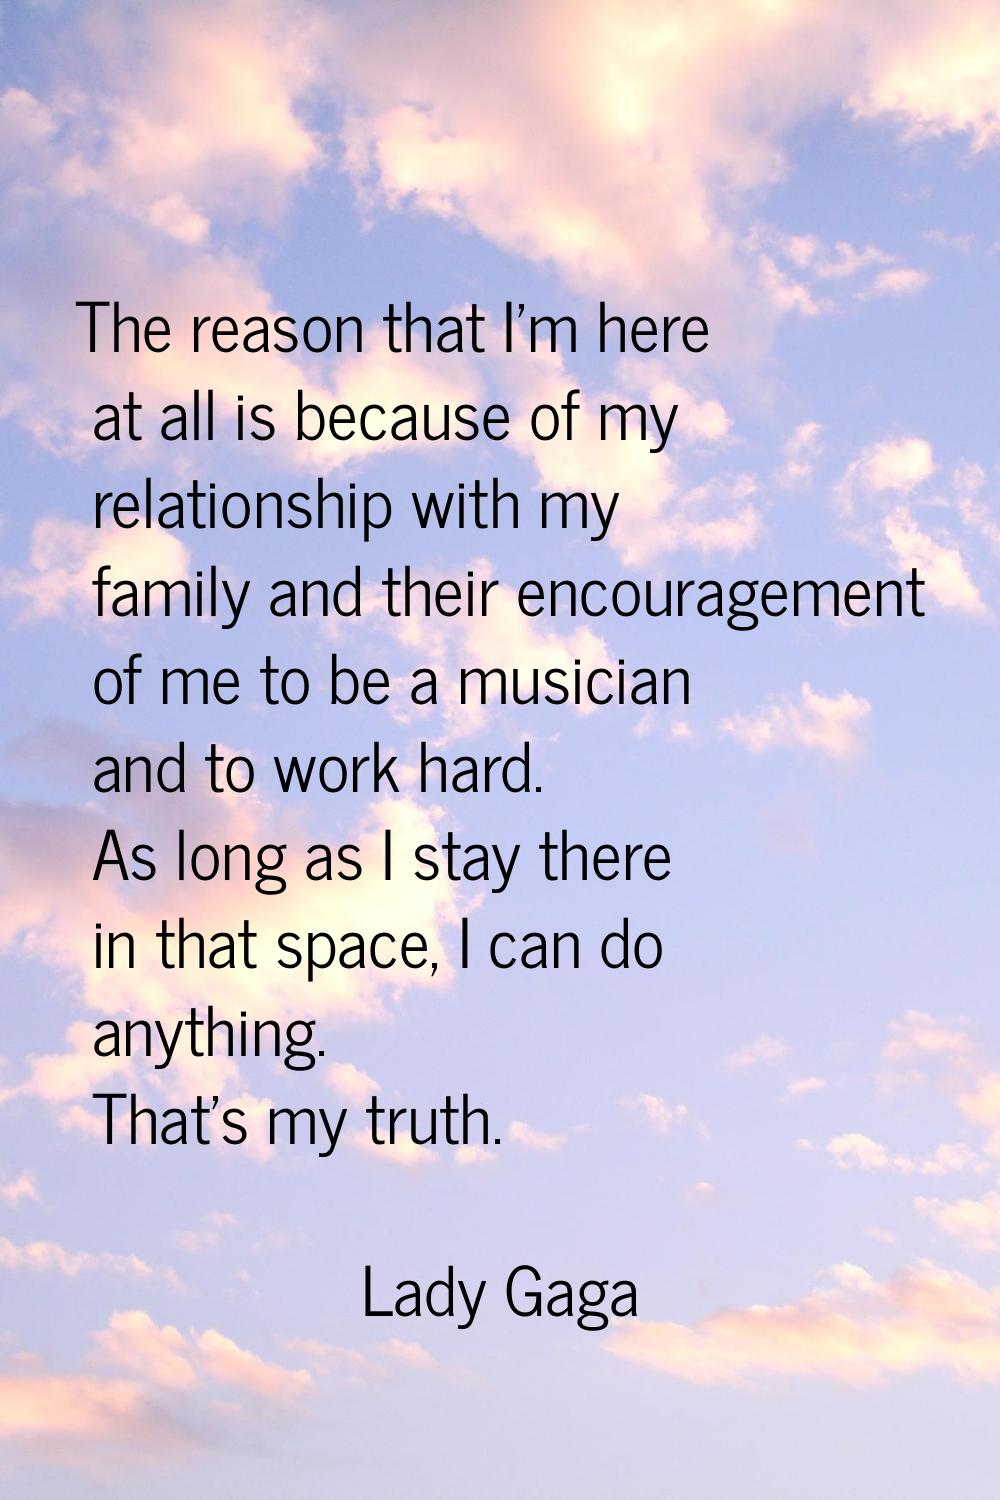 The reason that I'm here at all is because of my relationship with my family and their encouragemen